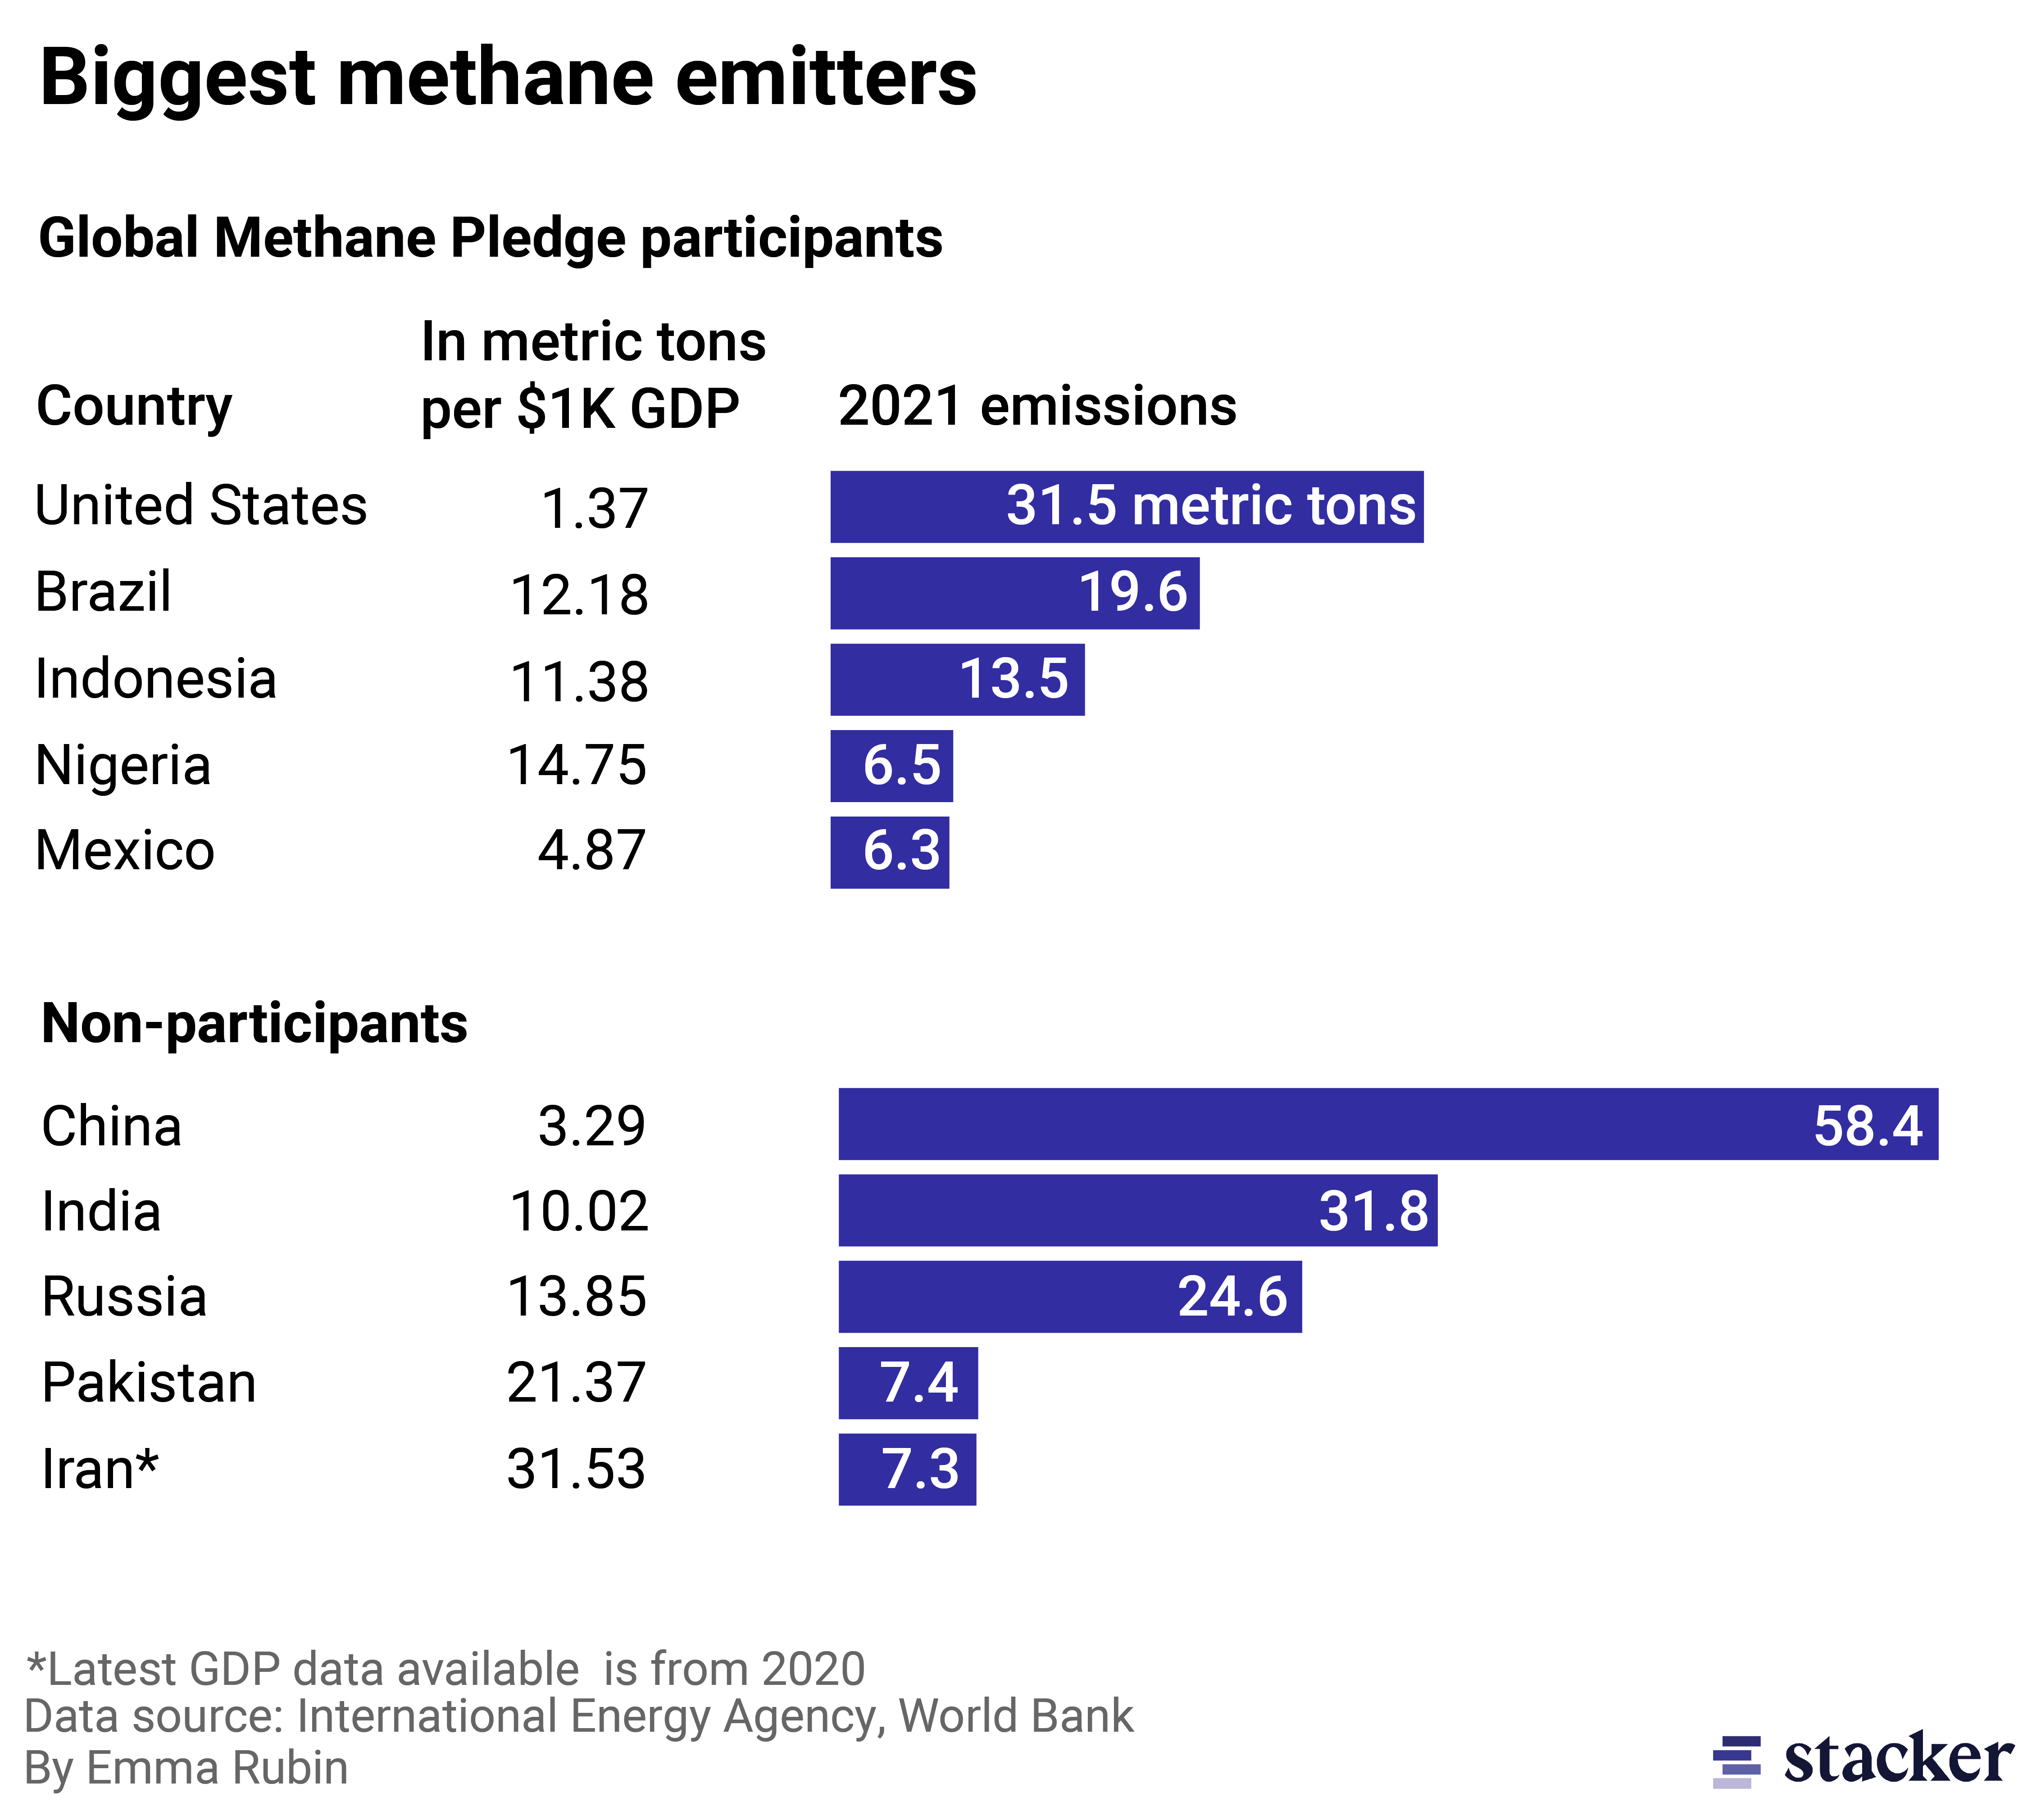 Bar chart of the 10 biggest global methane emitters which includes US, China, India and Russia.